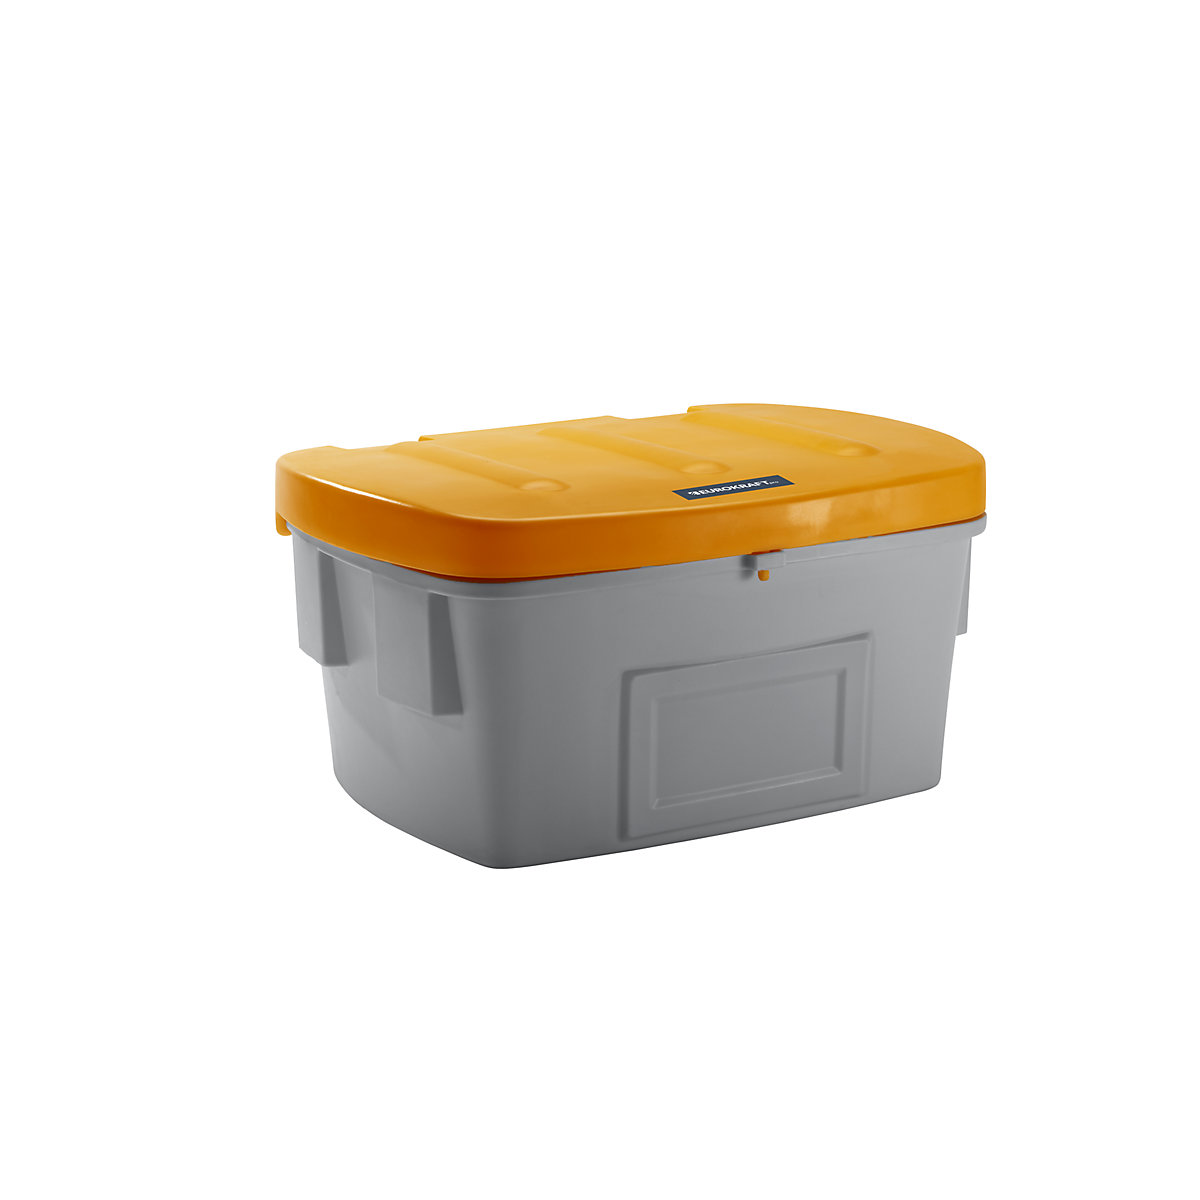 Universal / grit container – eurokraft pro, without dispenser opening, 550 l, orange lid-8